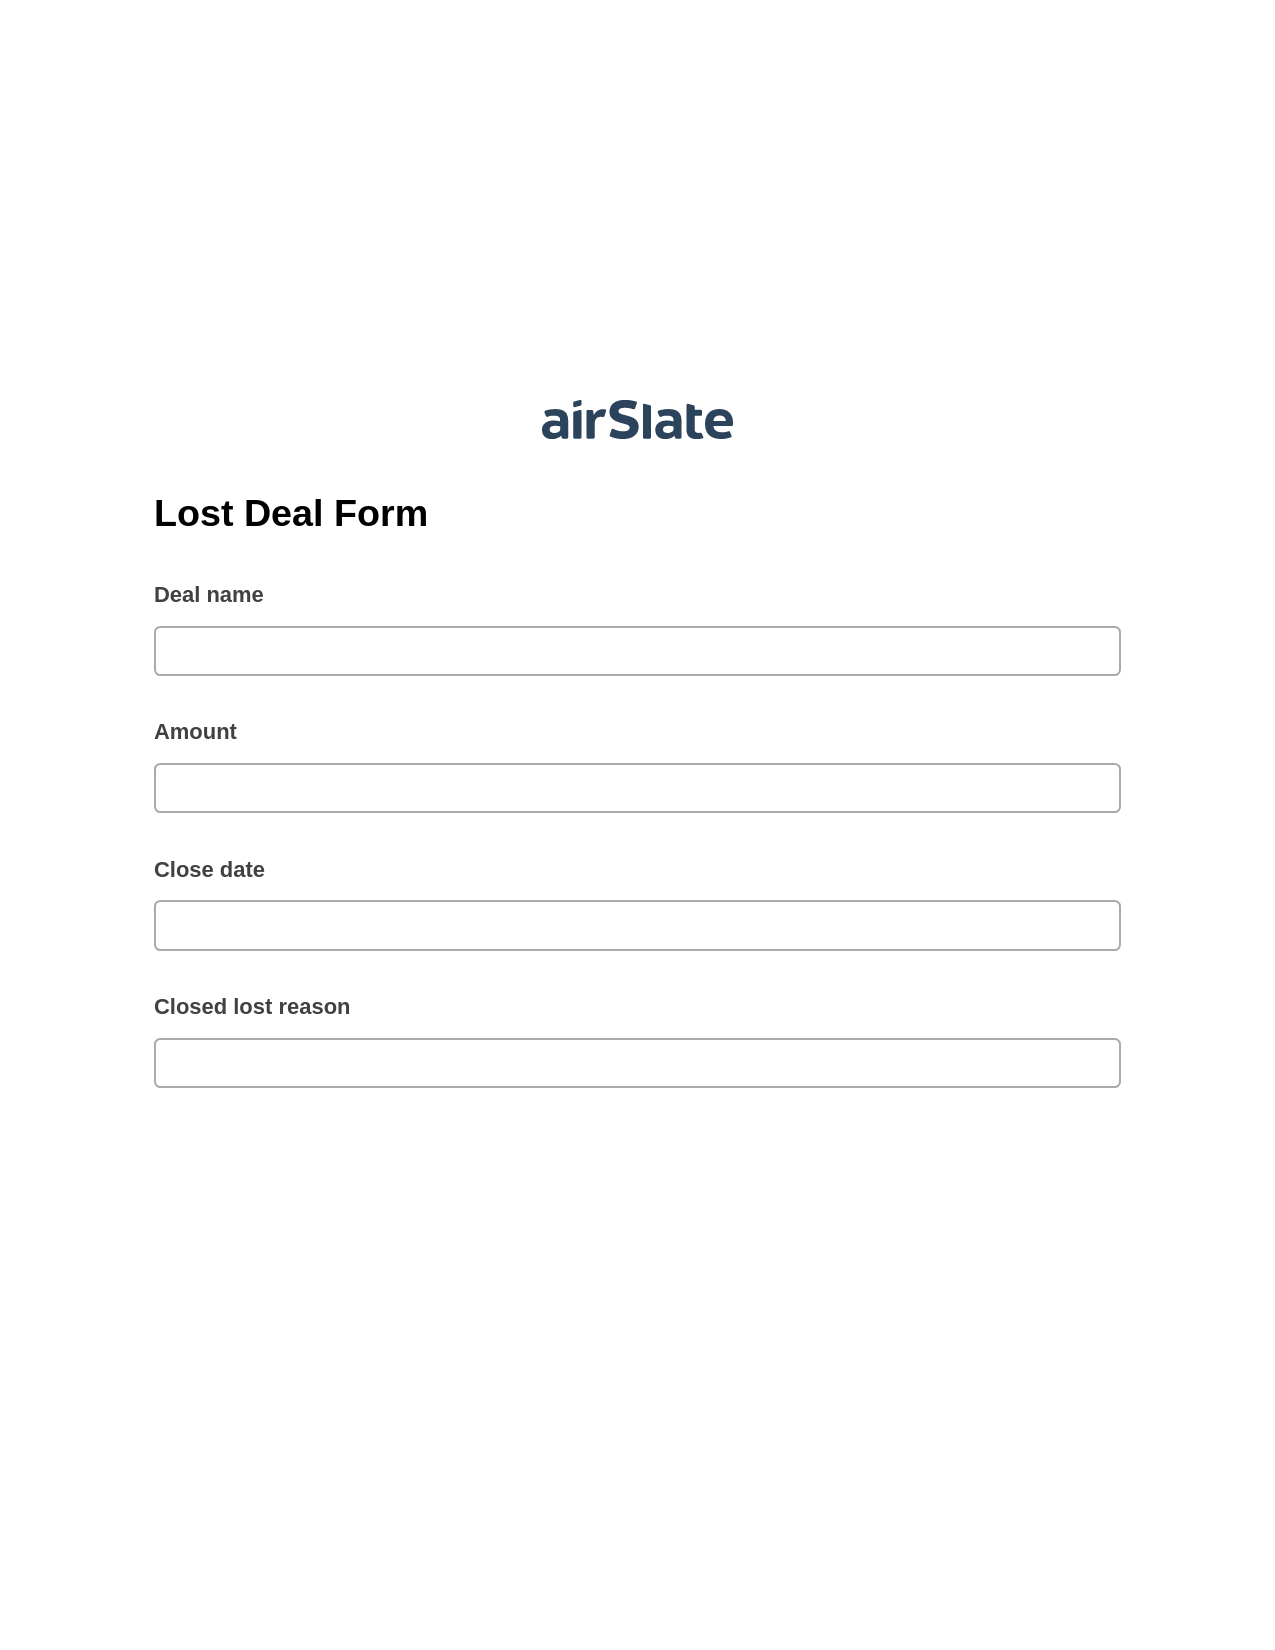 Lost Deal Form Prefill from NetSuite records, Add Tags to Slate Bot, Archive to OneDrive Bot